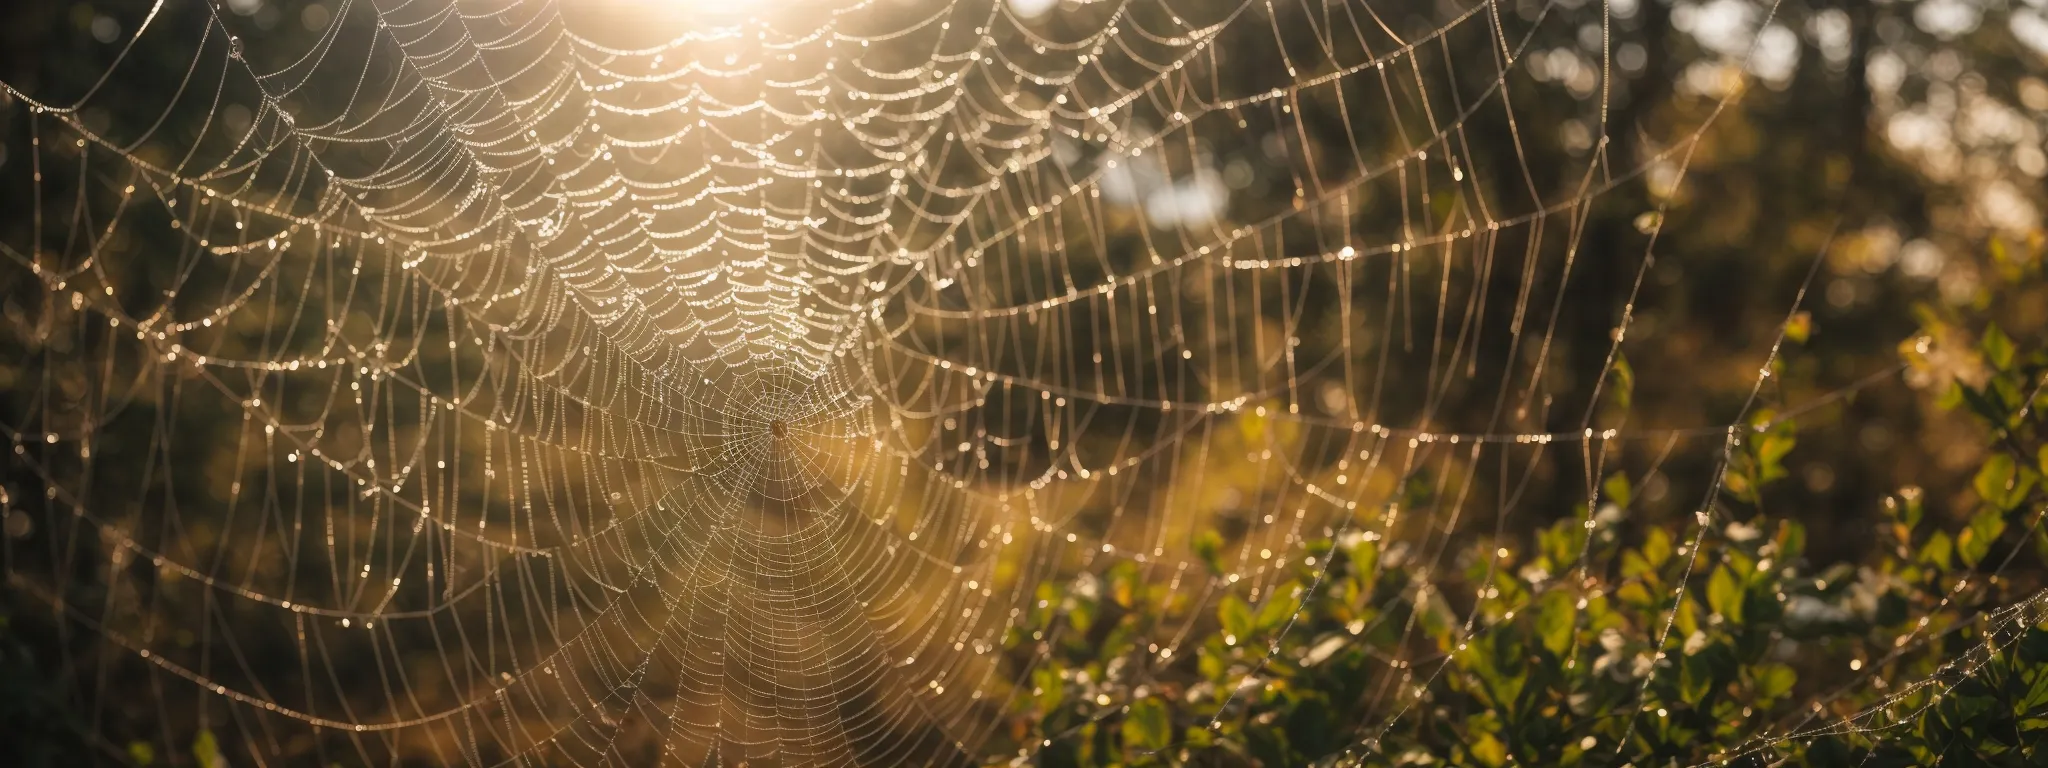 a close-up of interwoven spiderwebs glistening in the sunlight.